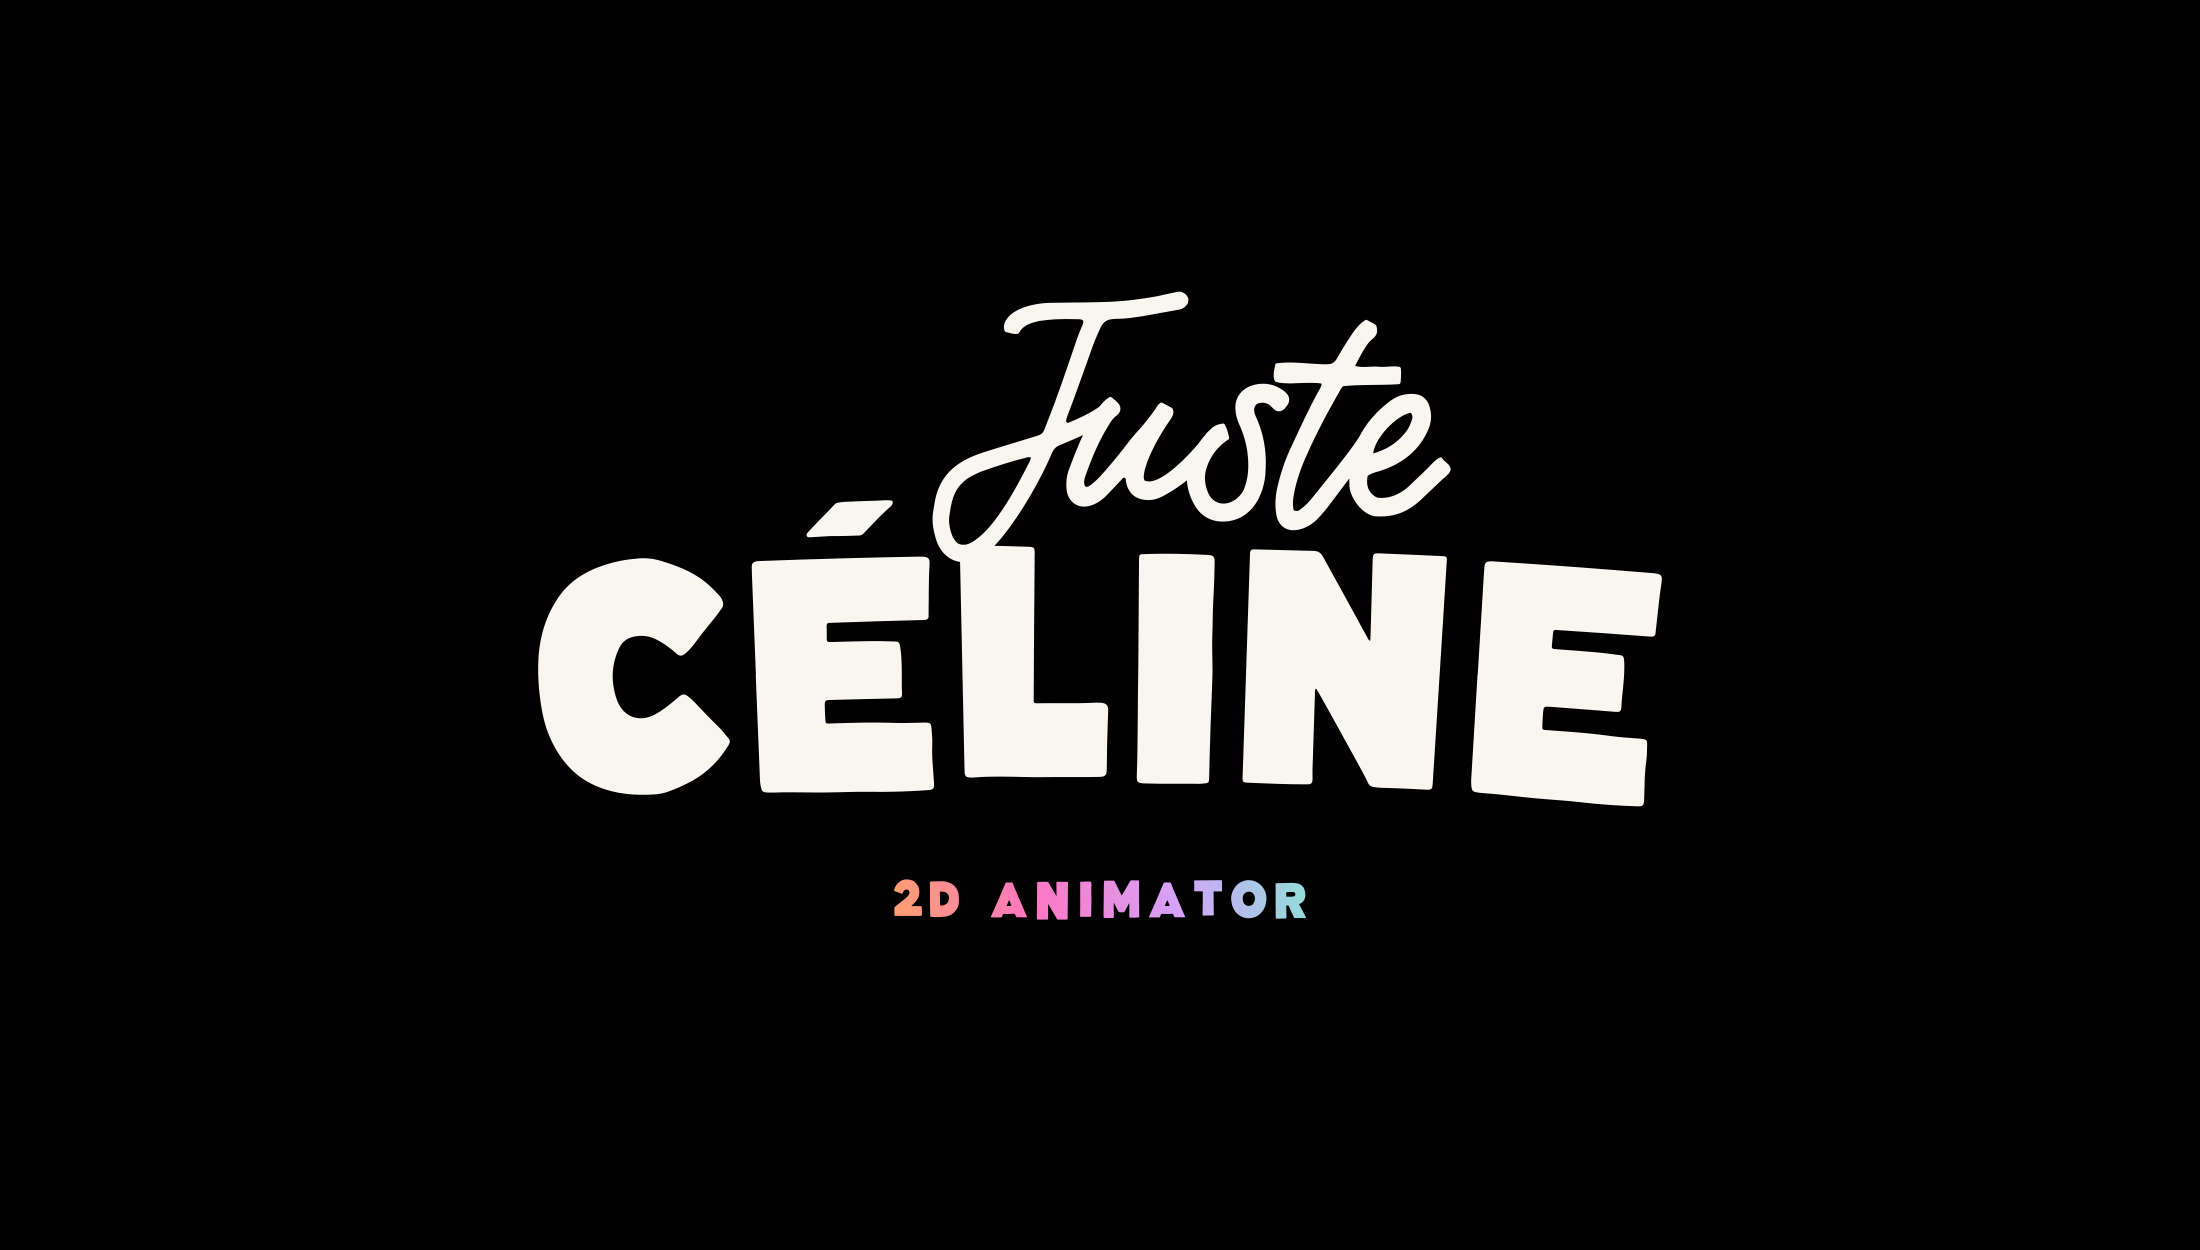 Logo design for Juste Céline, Twitch streamer and 2D animator - designed by Wiltshire-based graphic designer, Kaye Huett